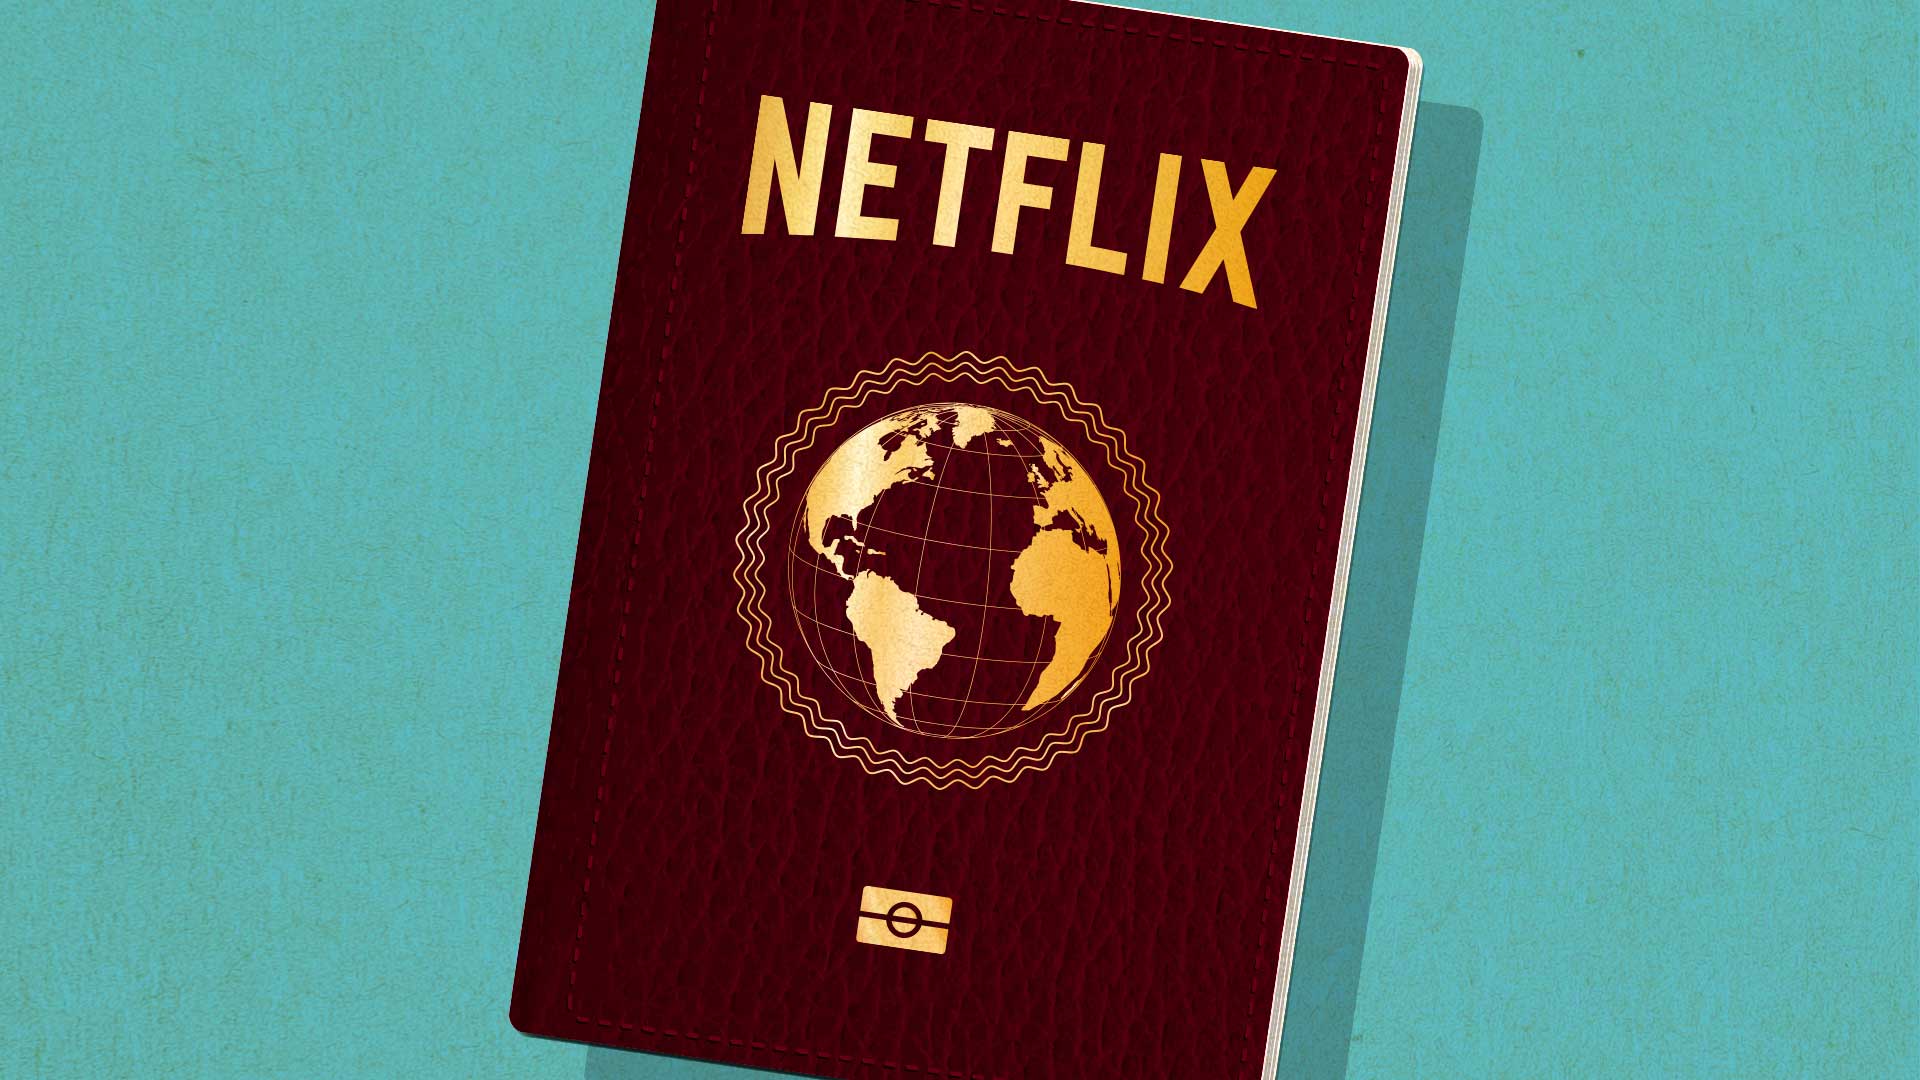 Netflix Global Content Strategy May Not Pay Off as Hoped